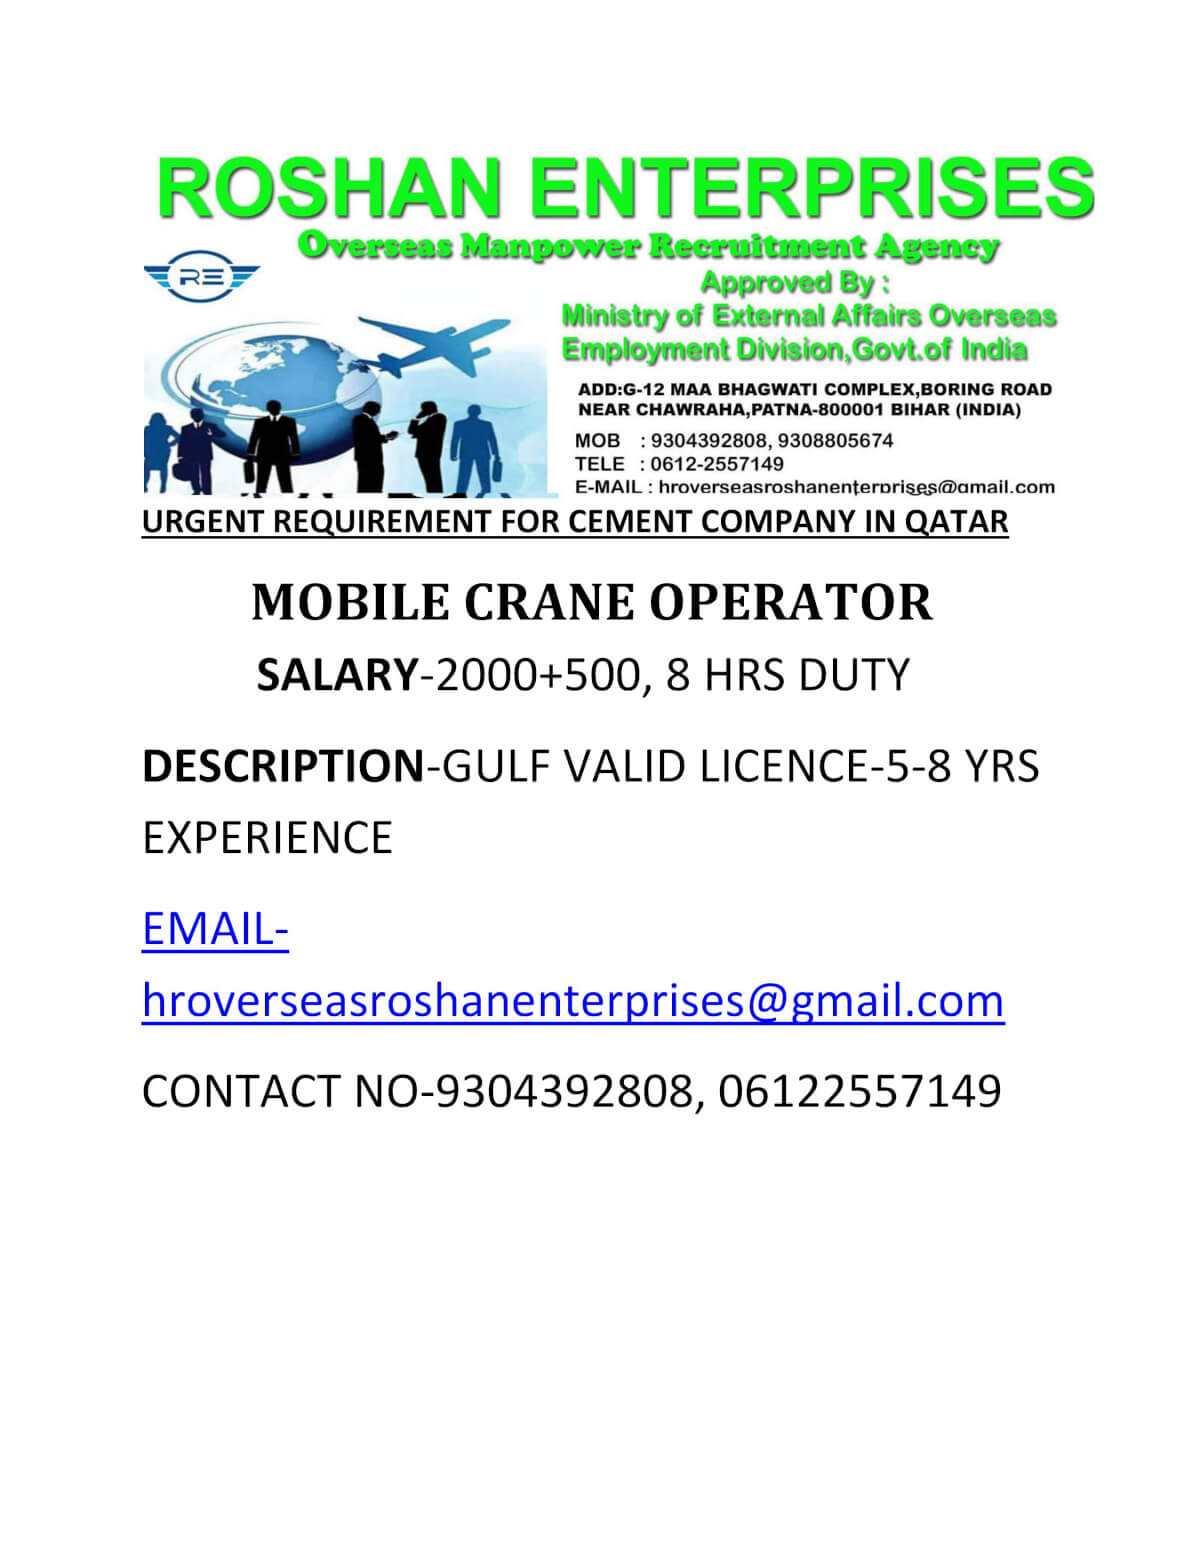 urgent requirement mobile crane operator for cement company in Qatar